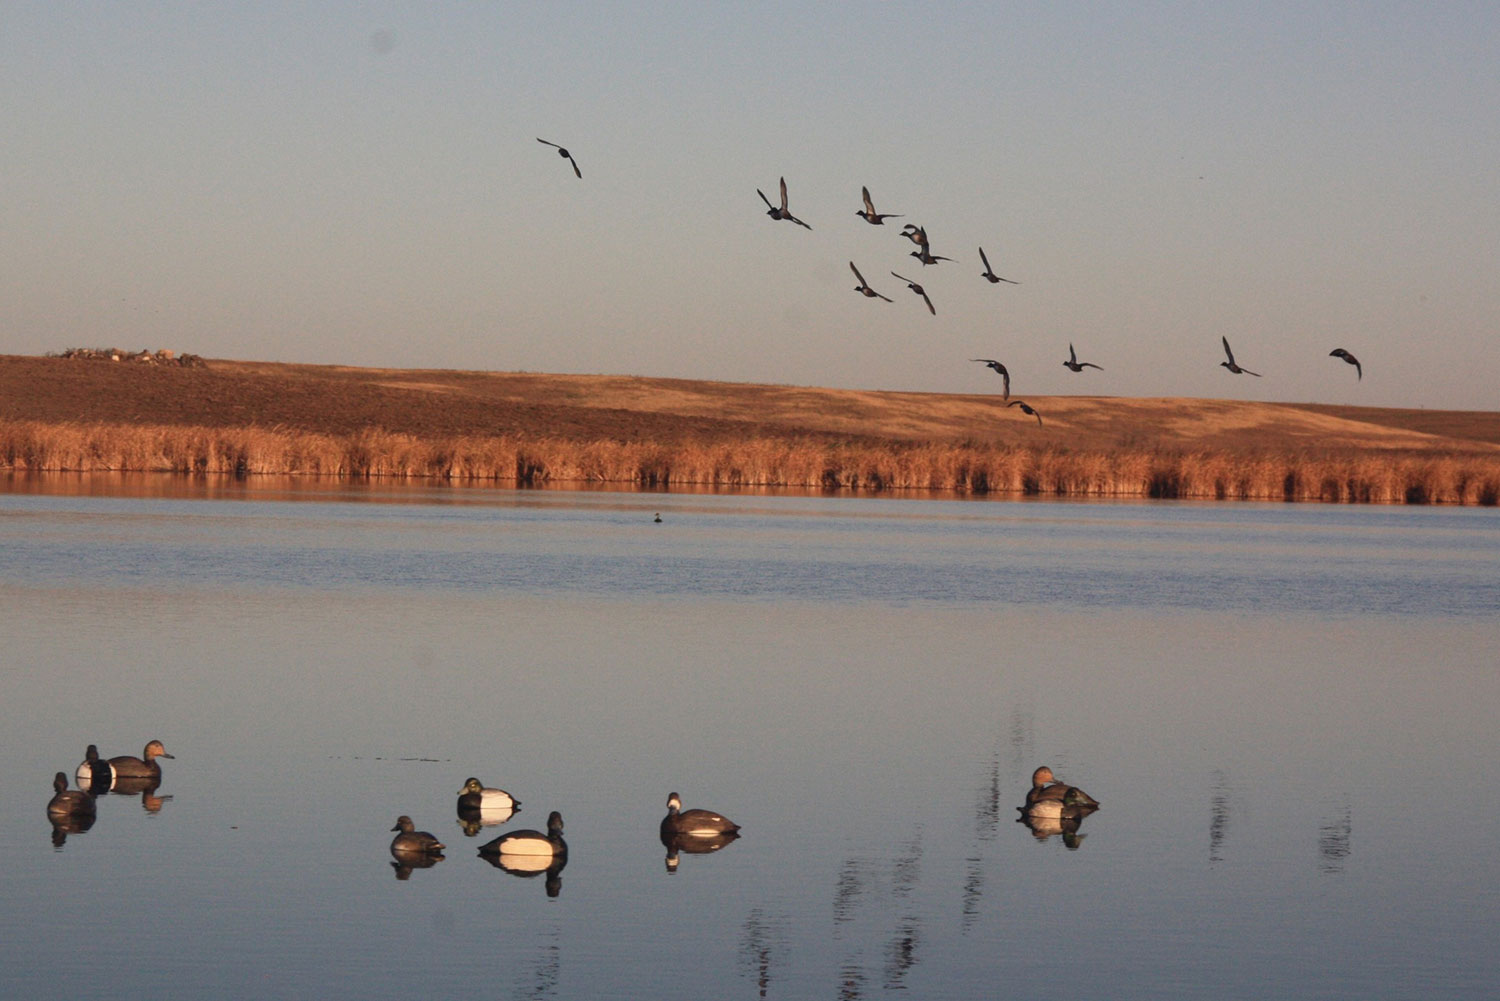 Ducks flying over wetland with decoys in the water